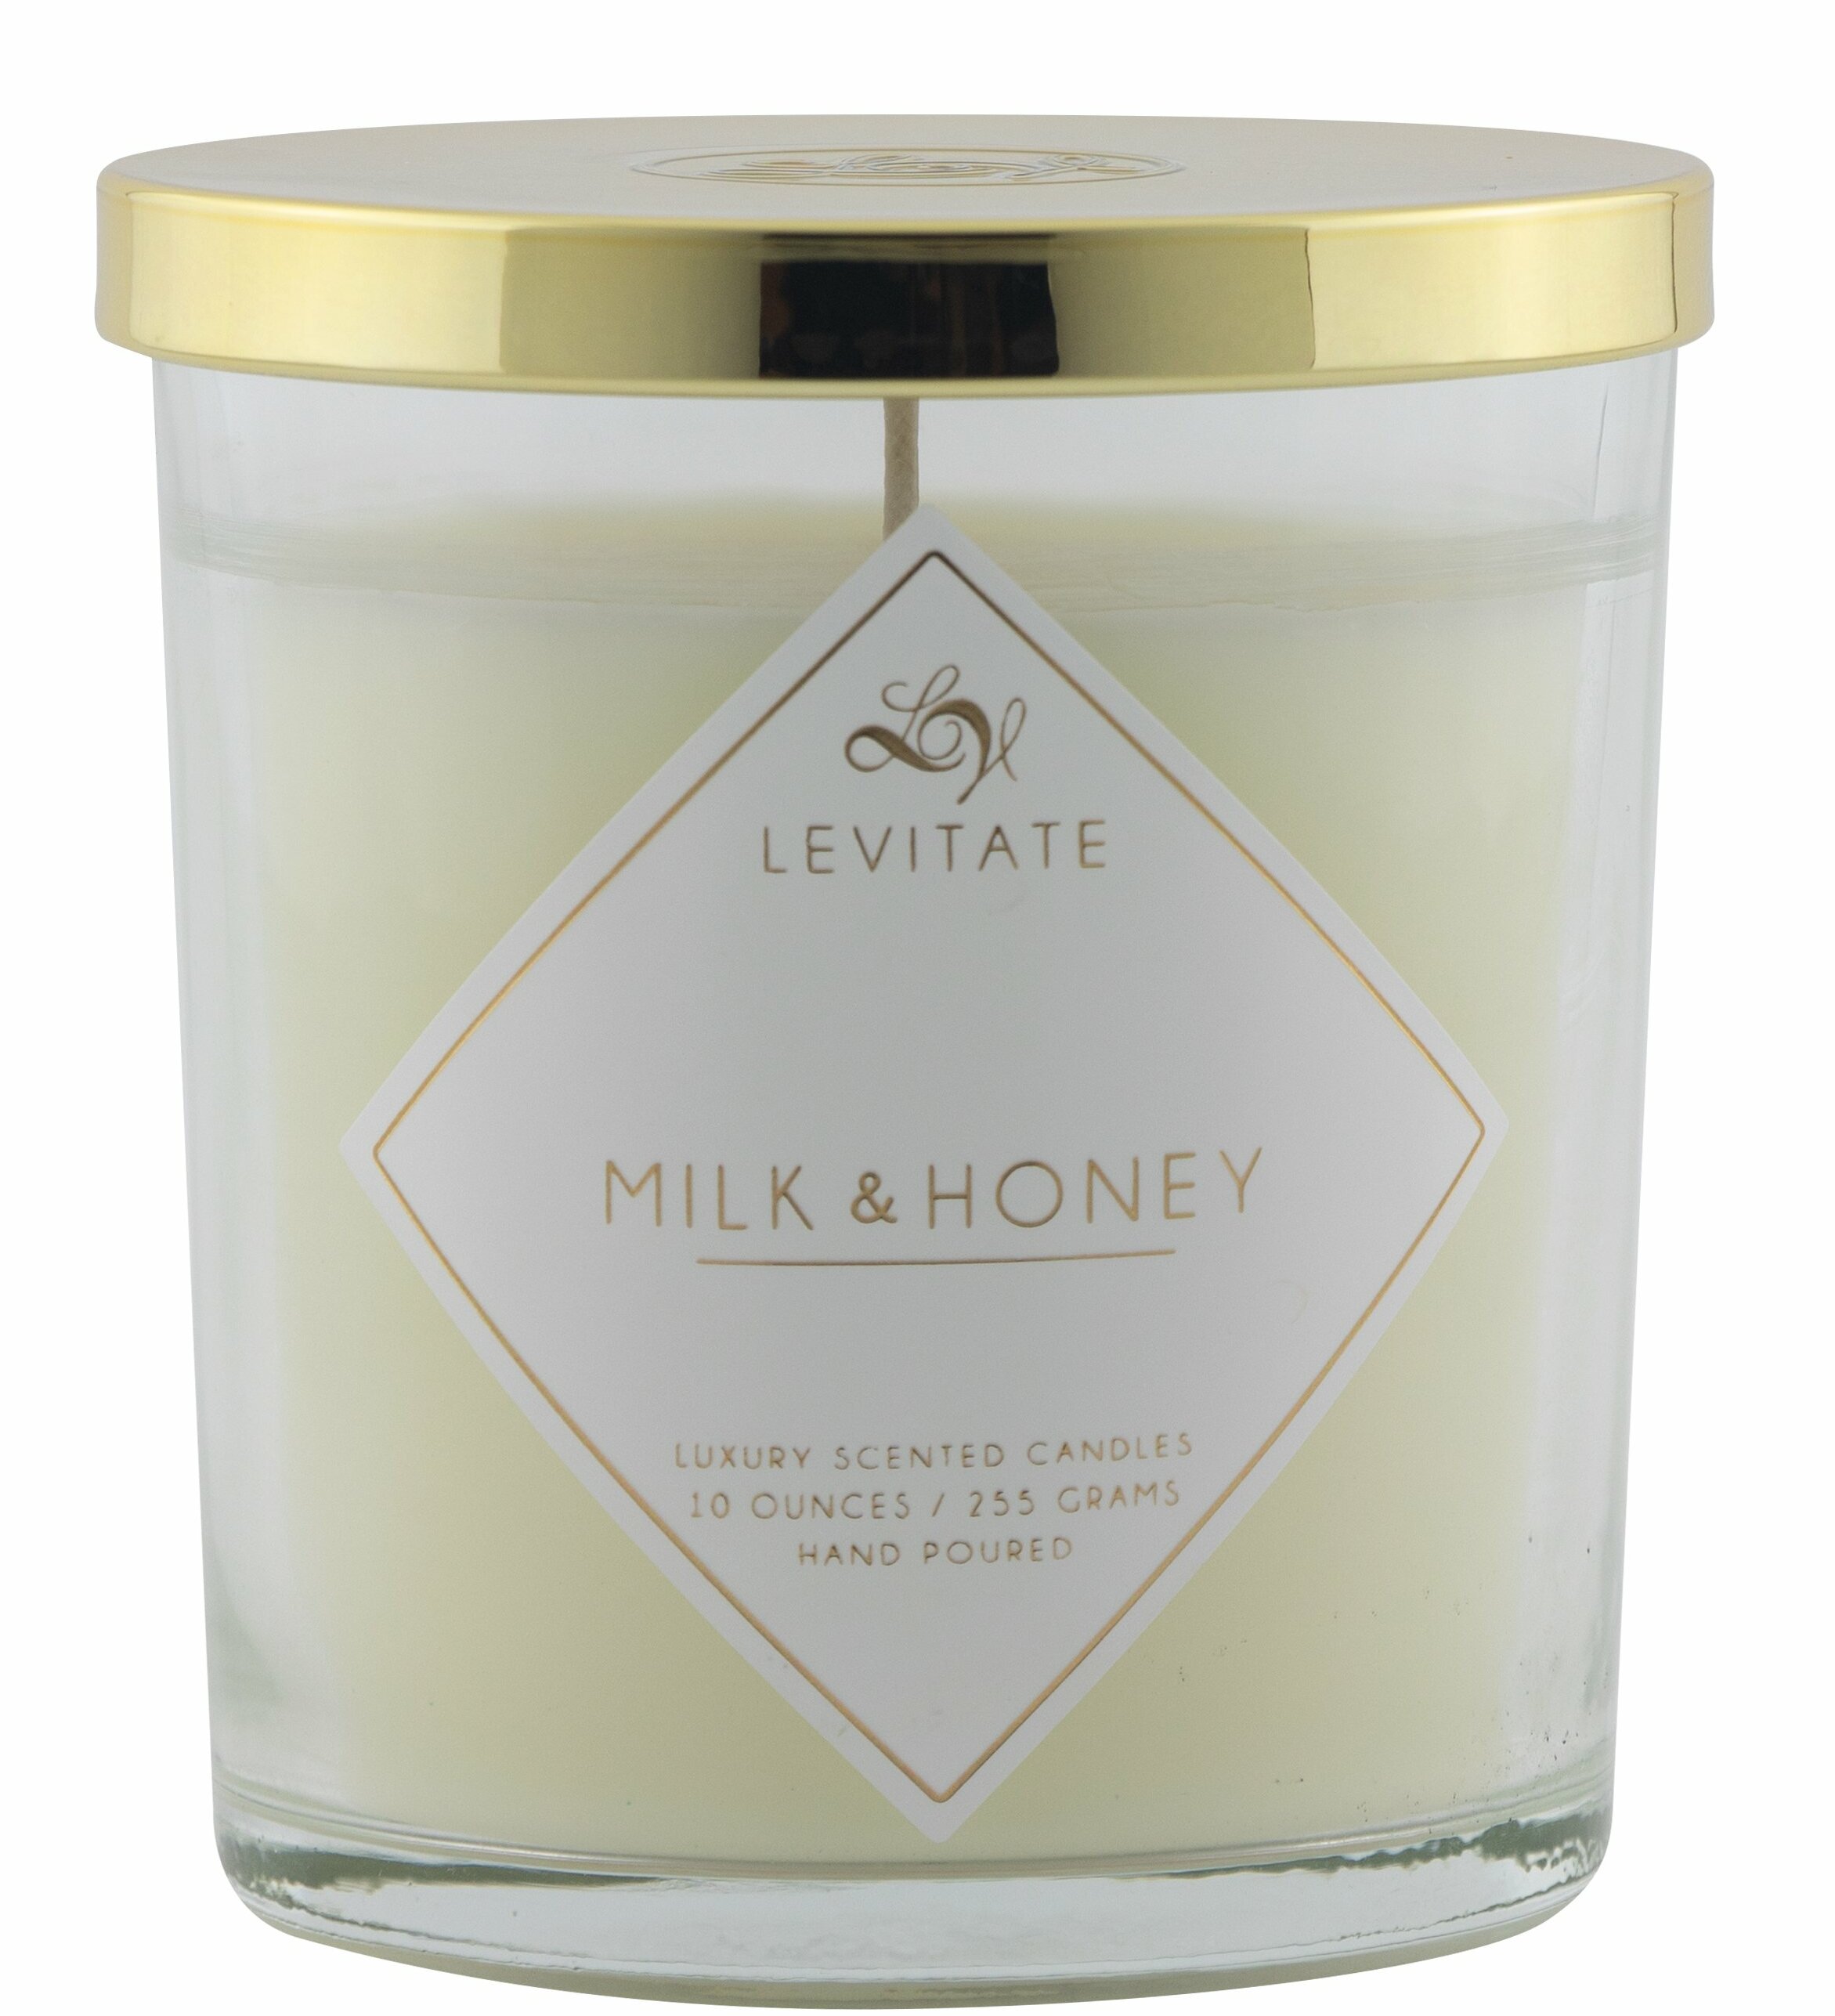 MILK & HONEY Sweet & Smooth Scent SOY TEA LIGHT CANDLES 10pk 120hr/pack OATMEAL 